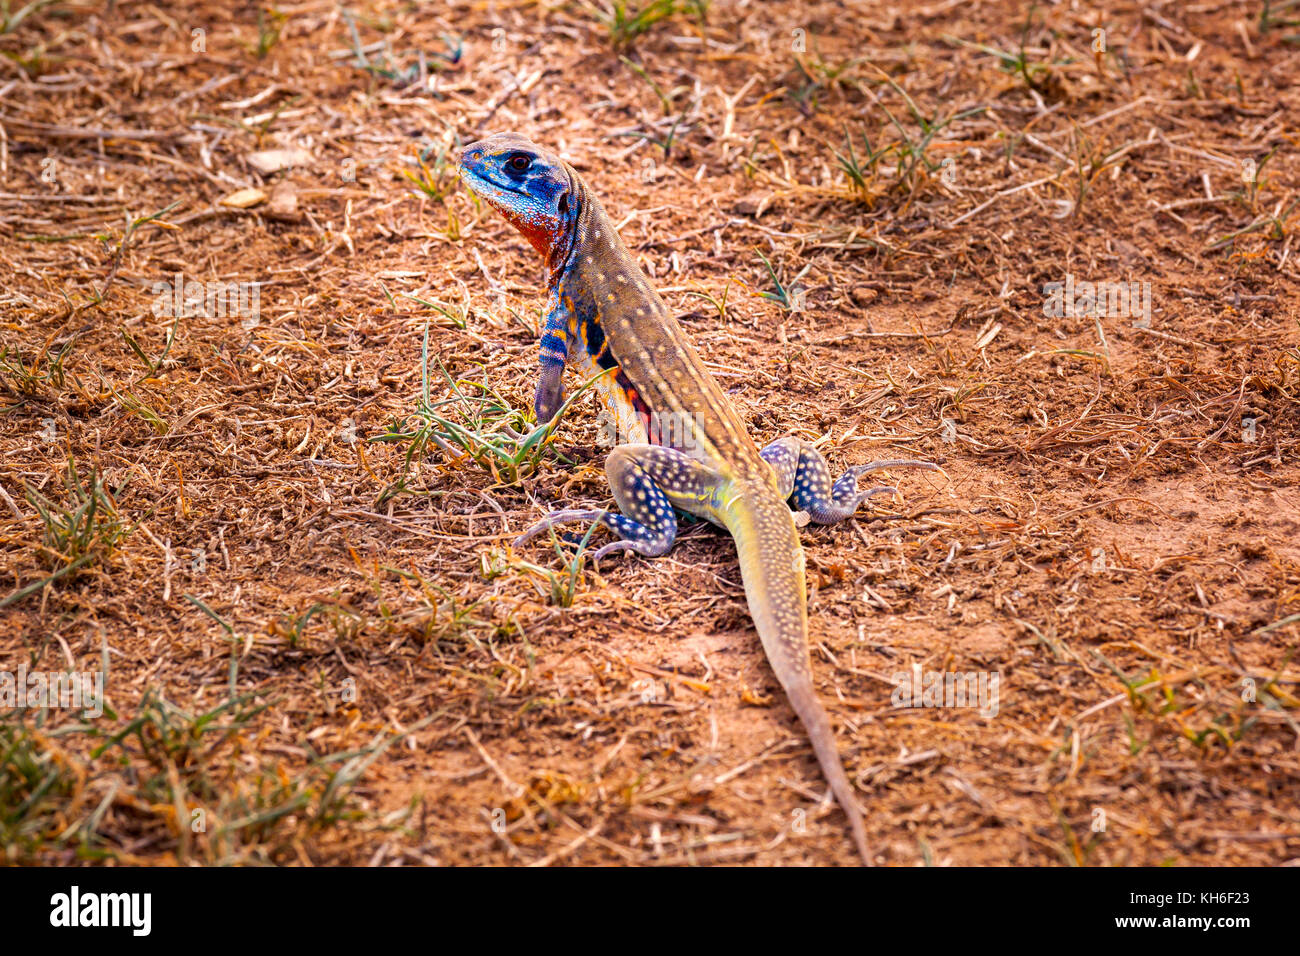 Colorful Thai Butterfly Lizard or Thai Iguana standing on the ground Stock Photo